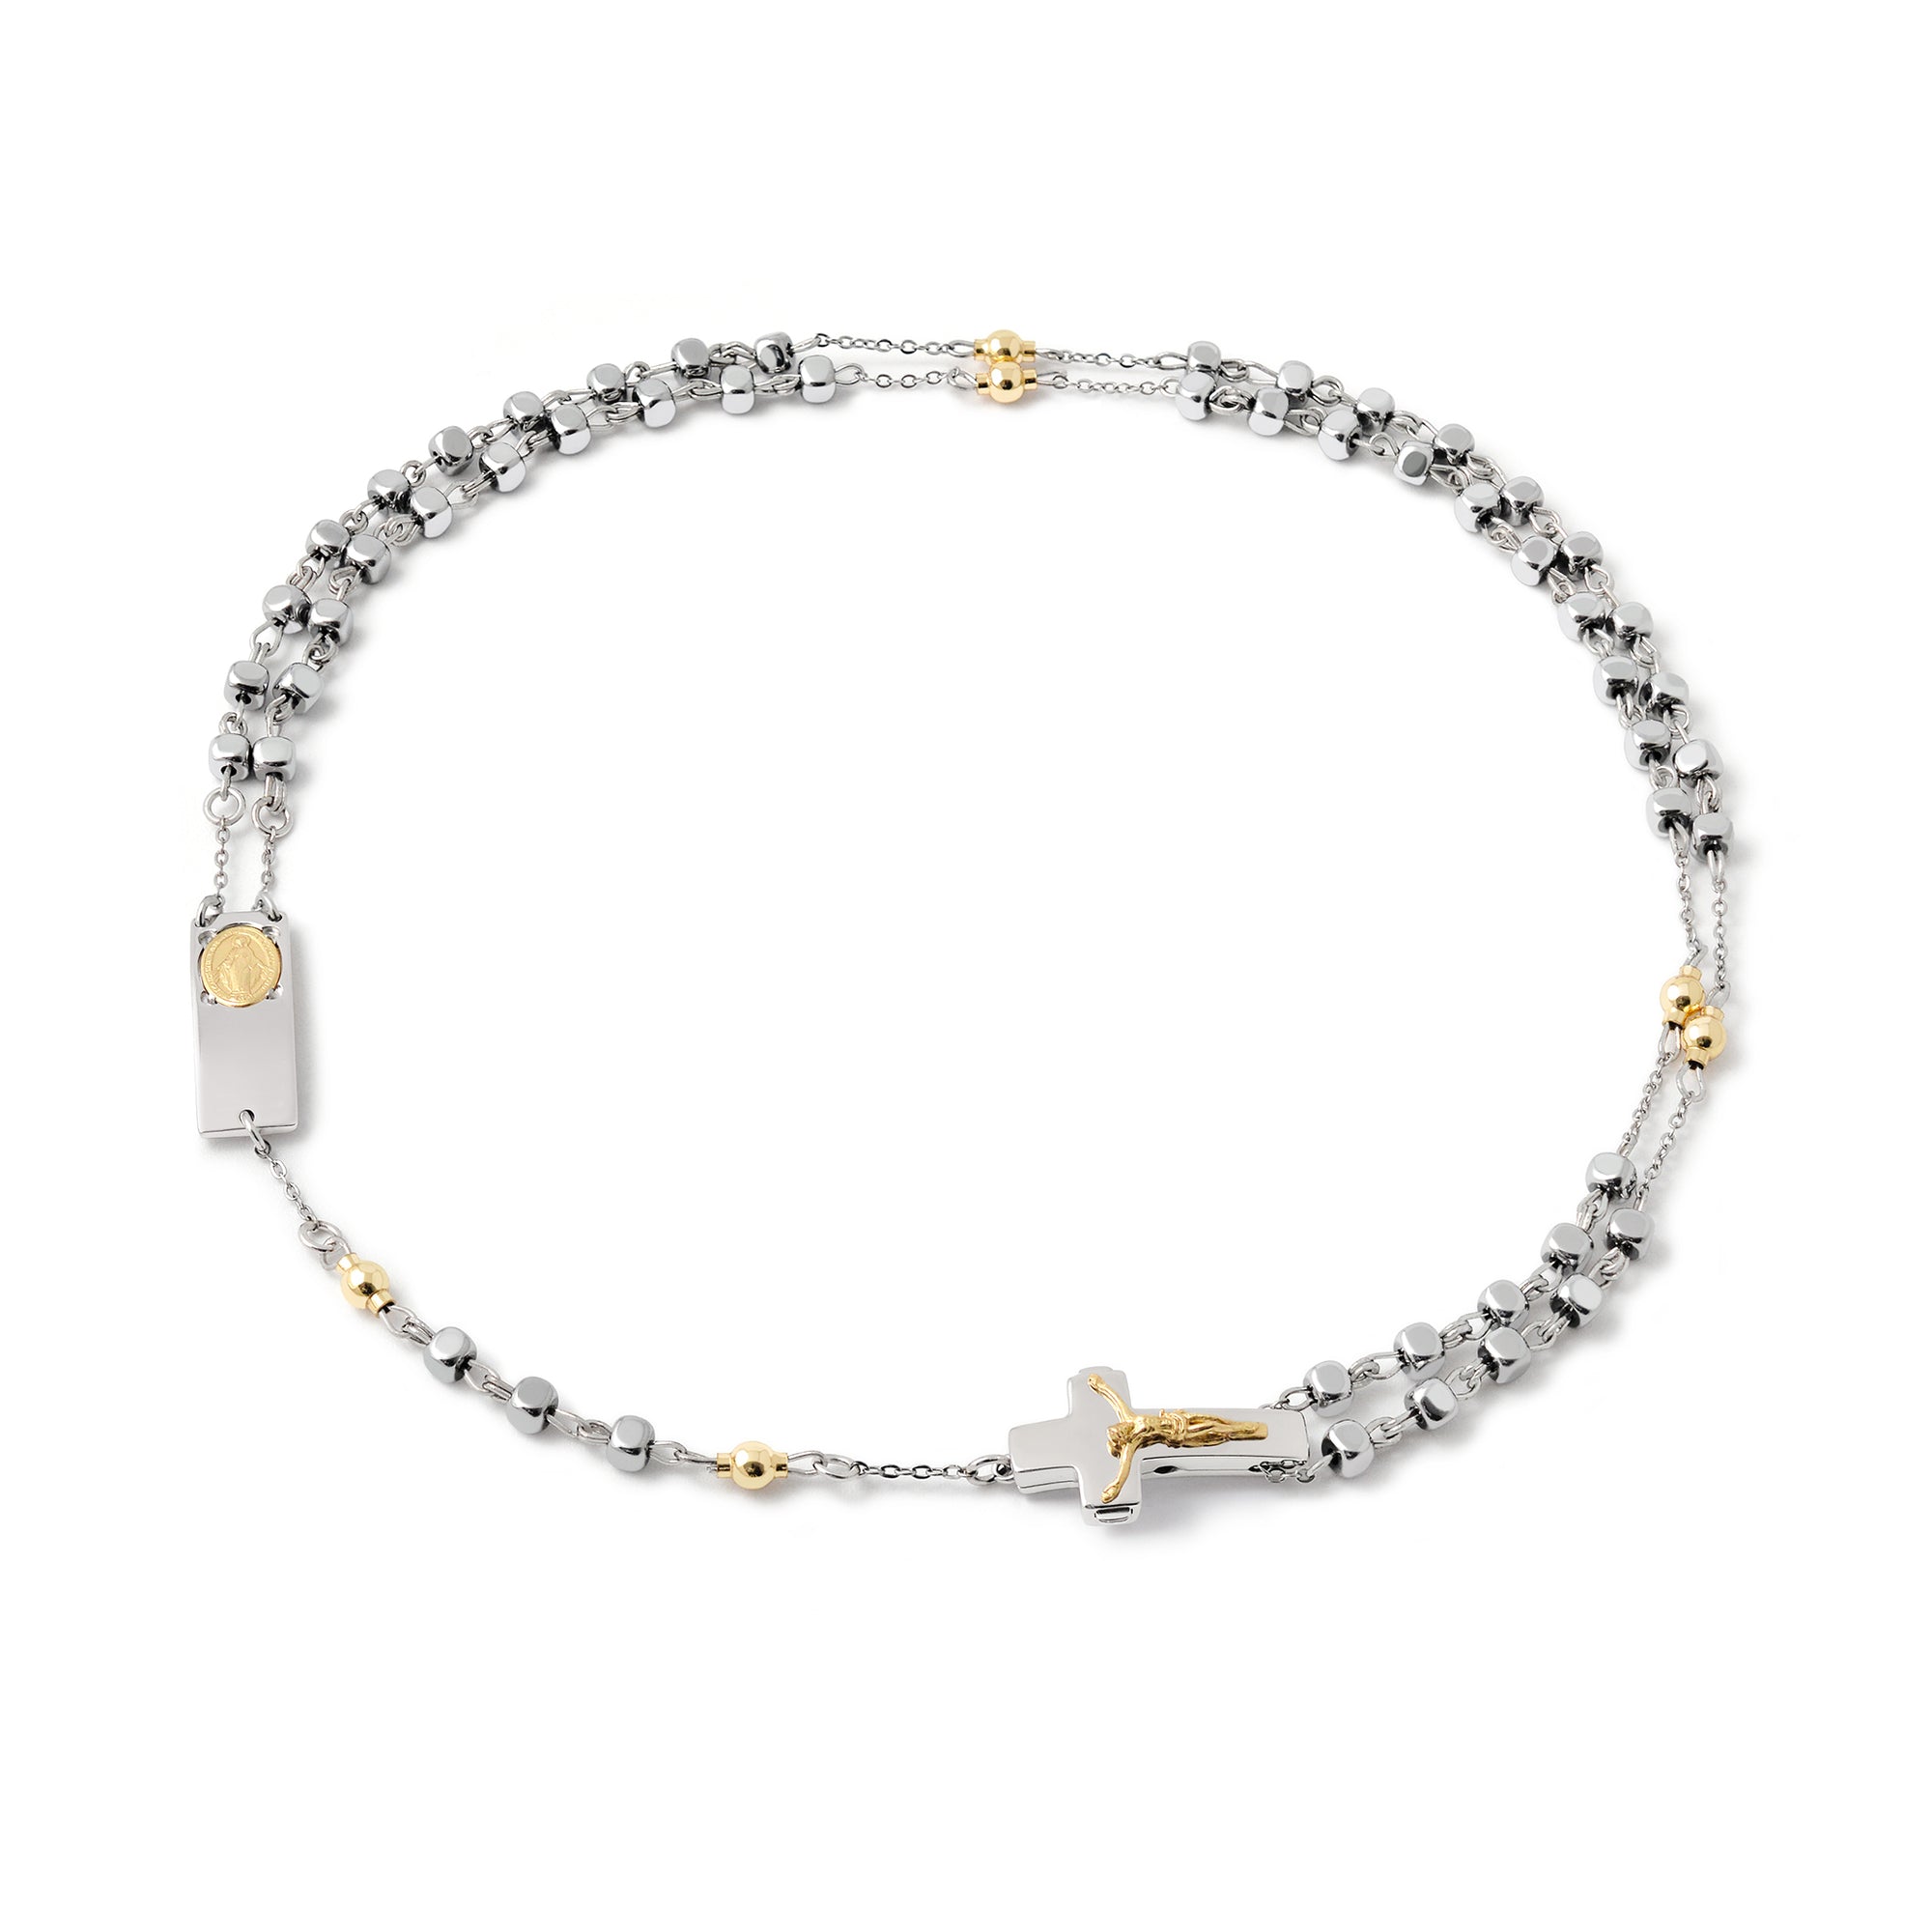 ROSALET® NECKLACE SQUARE SILVER HEMATITE BEADS, STERLING SILVER & GOLD PATER